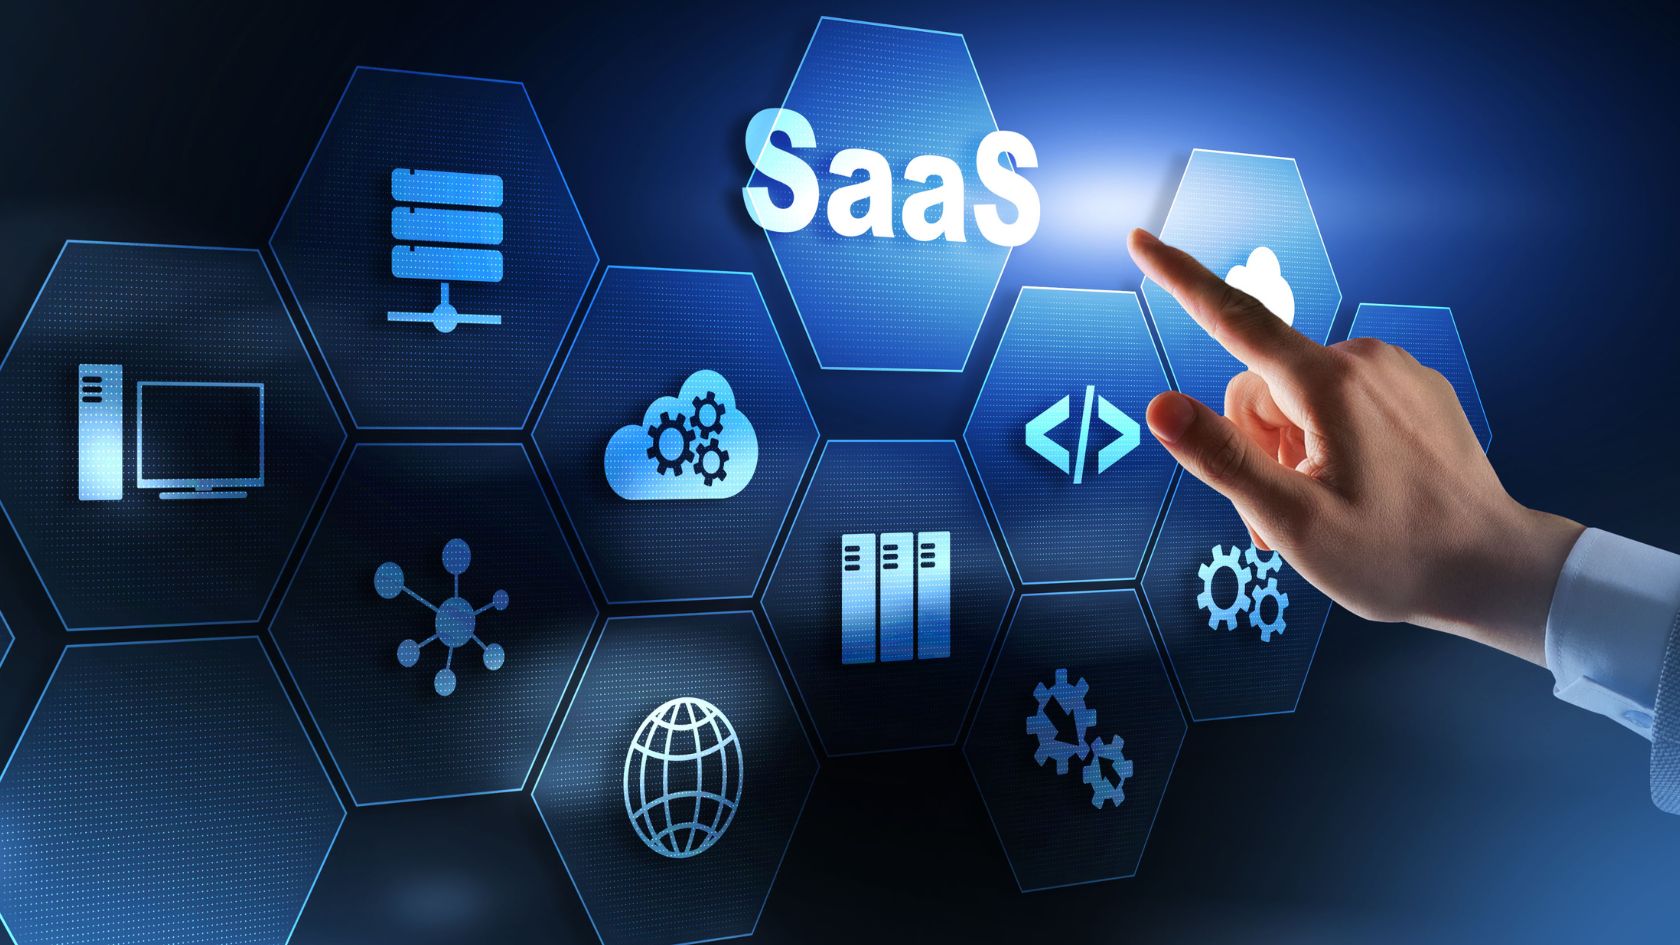 100+ SAAS Prompts to Start, Launch & Scale a Profitable SAAS Agency